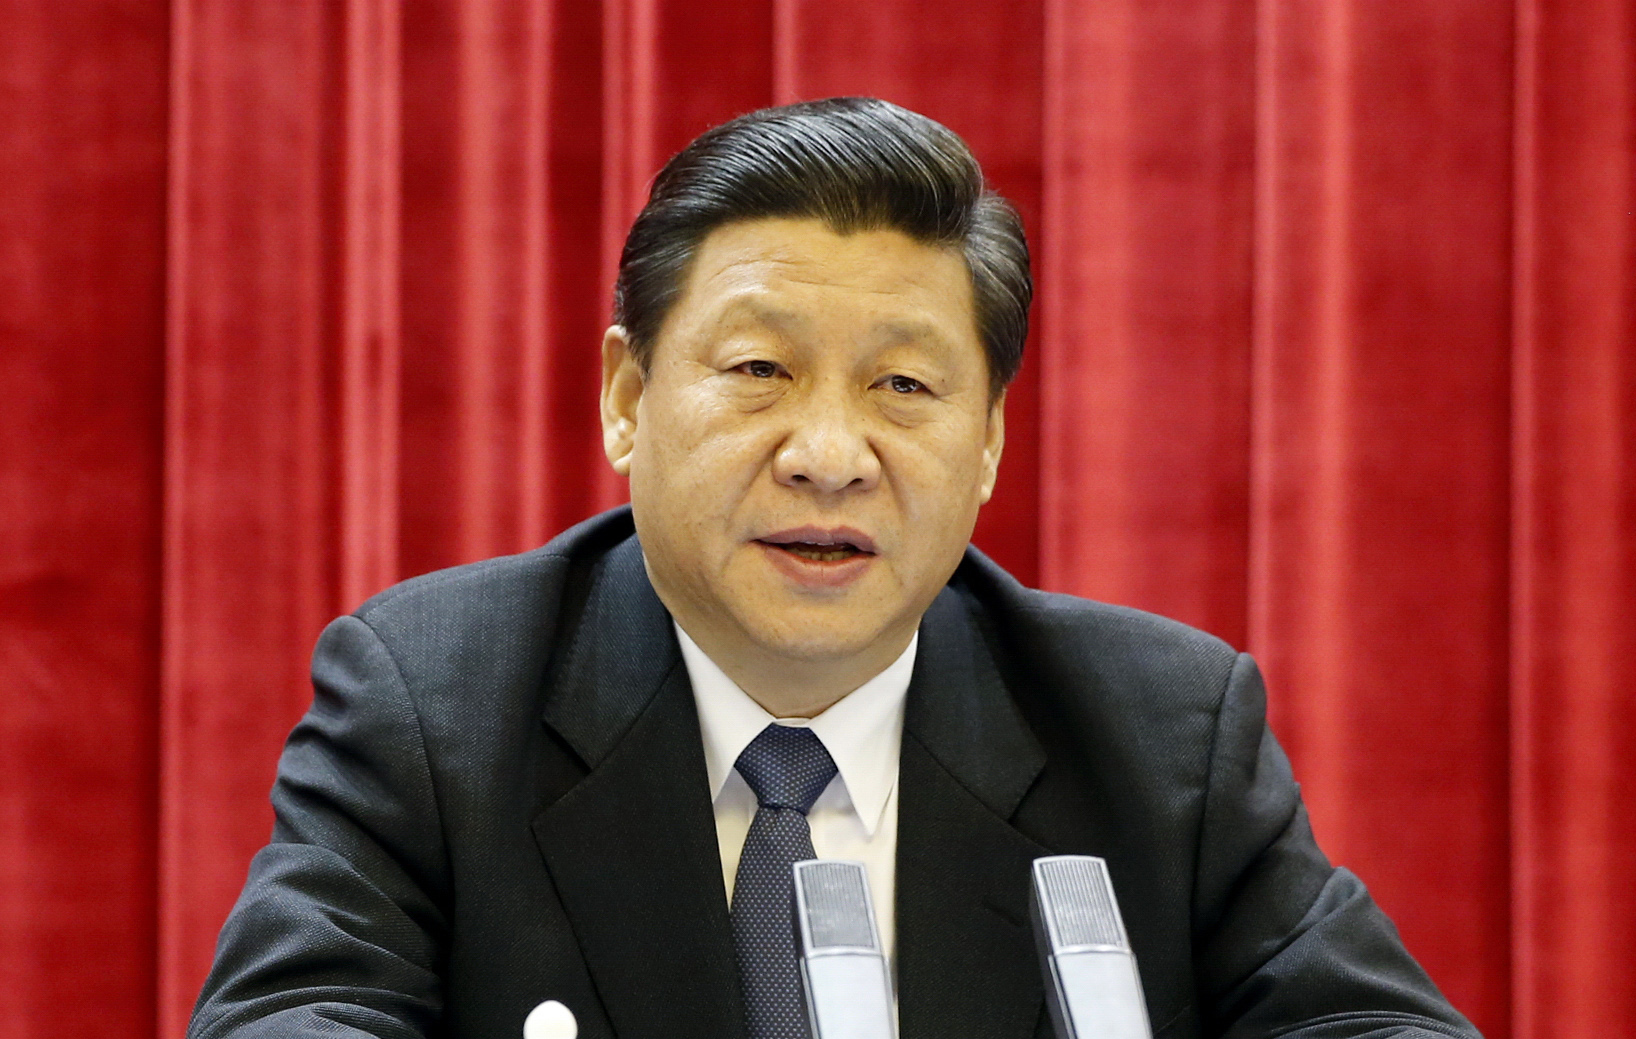 Xi Jinping has vowed to crack down on corruption. Photo: Xinhua